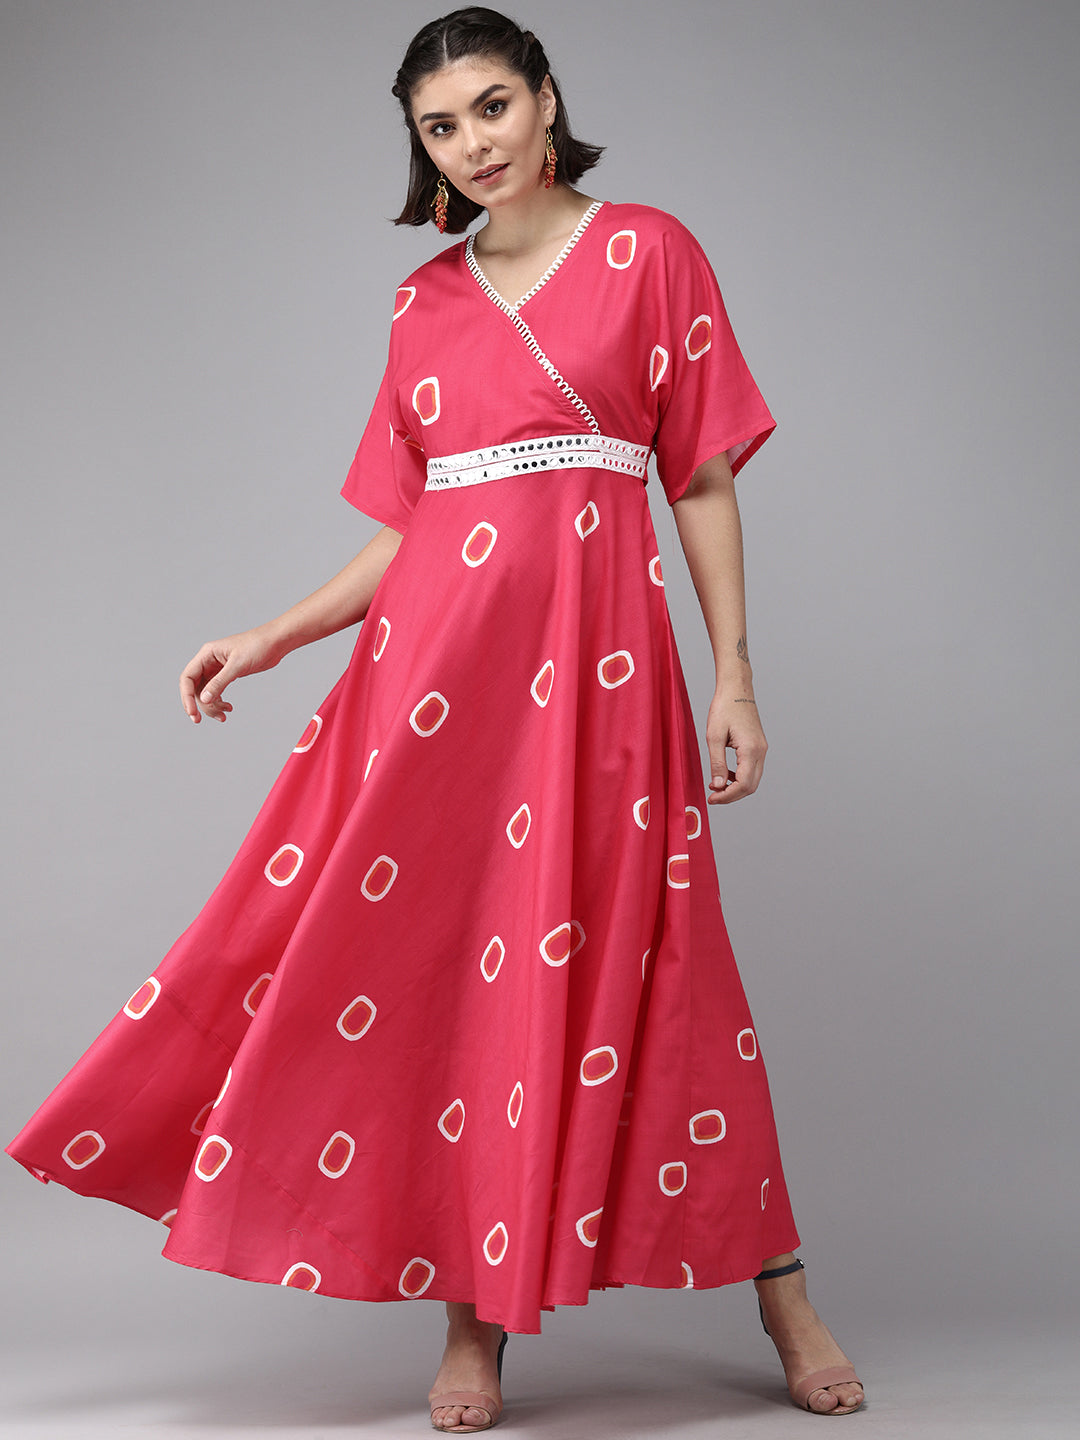 Bhama Couture Pink Floral Print Maxi Dress